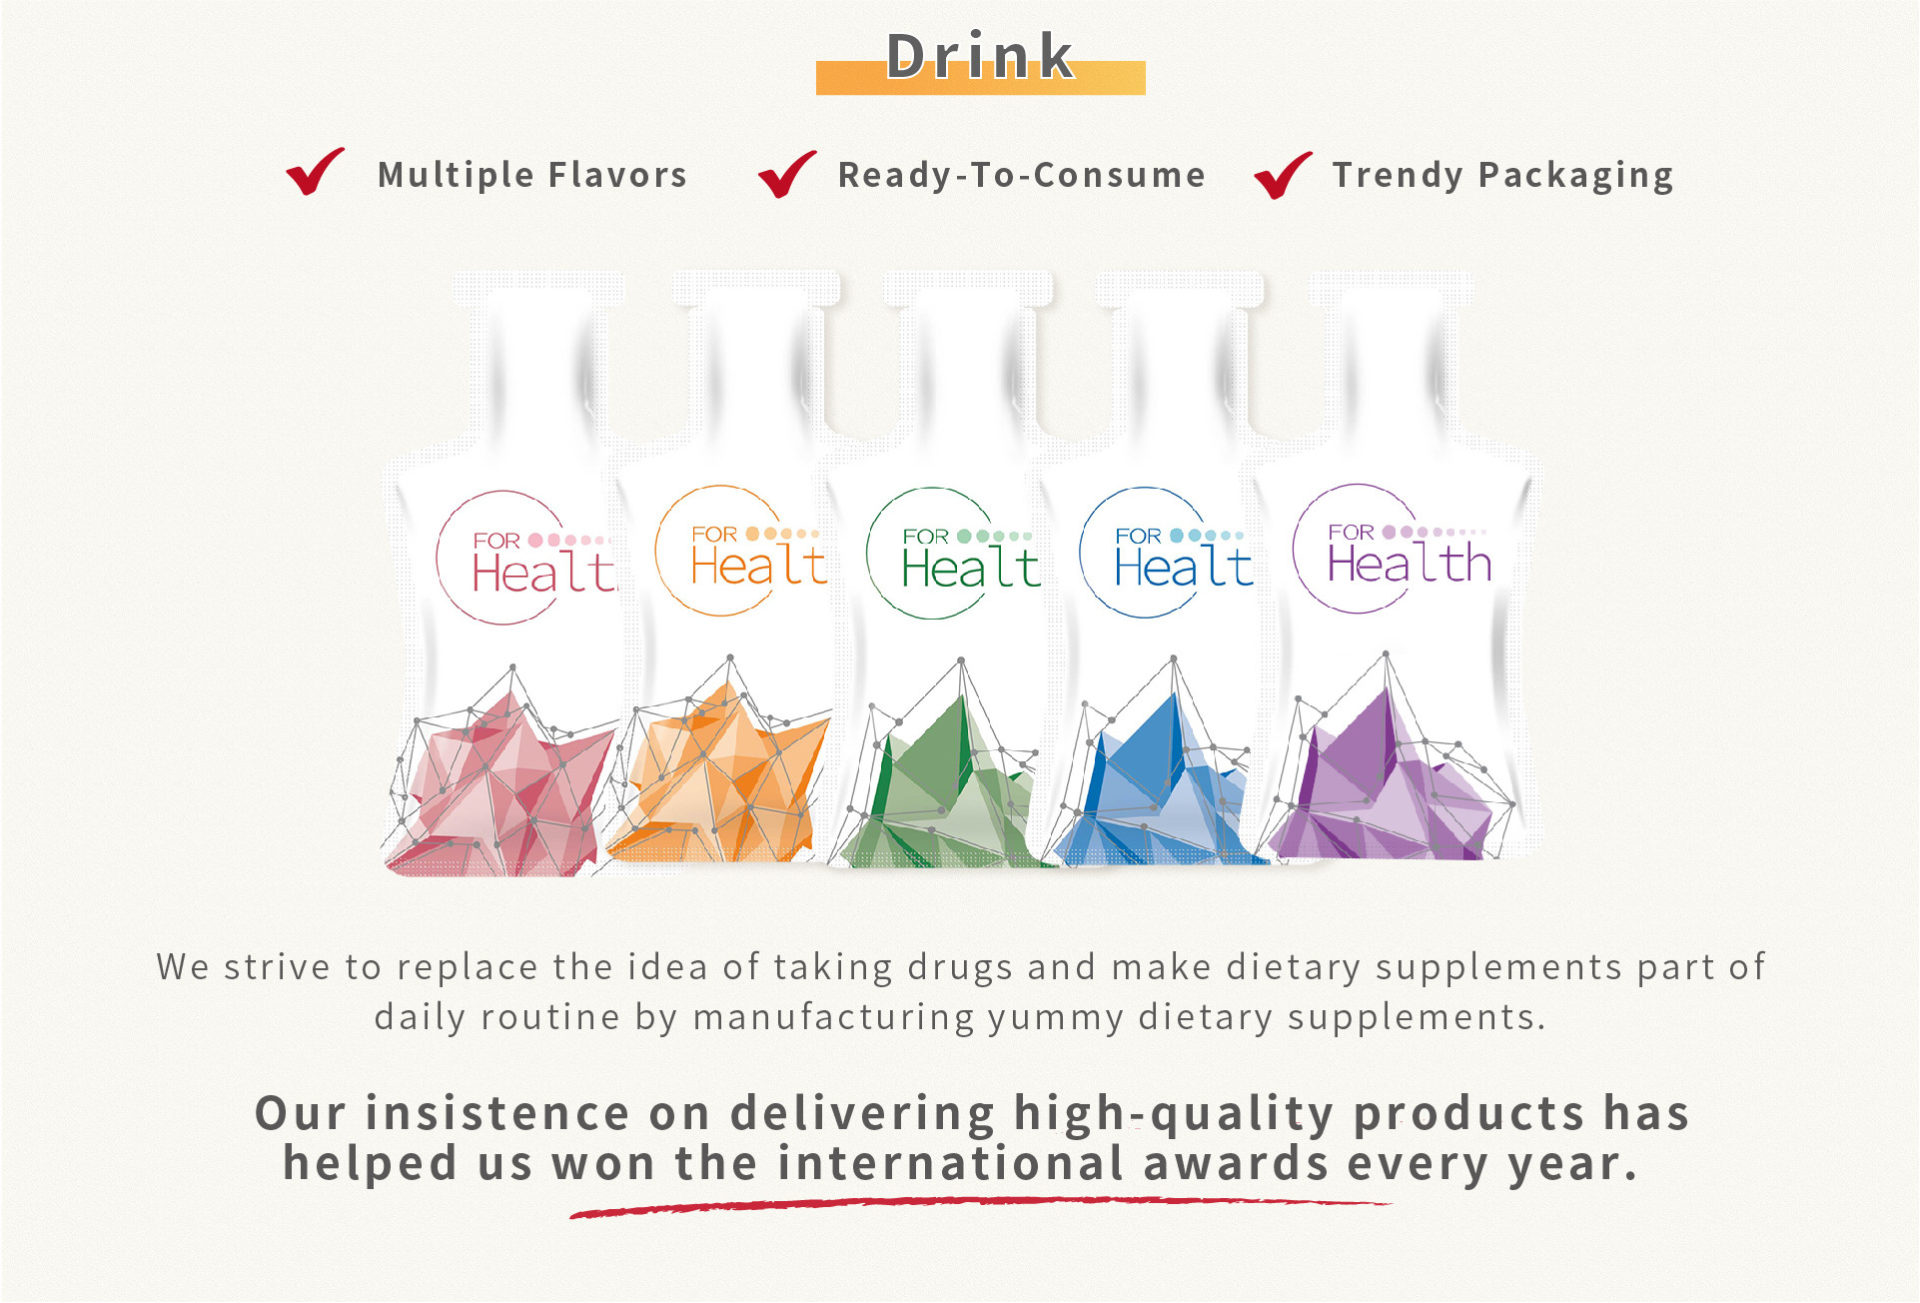 We strive to replace the idea of taking drugs and make dietary supplements part of daily routine by manufacturing yummy dietary supplements.  Our insistence on delivering high-quality products has helped us won the international awards every year. 